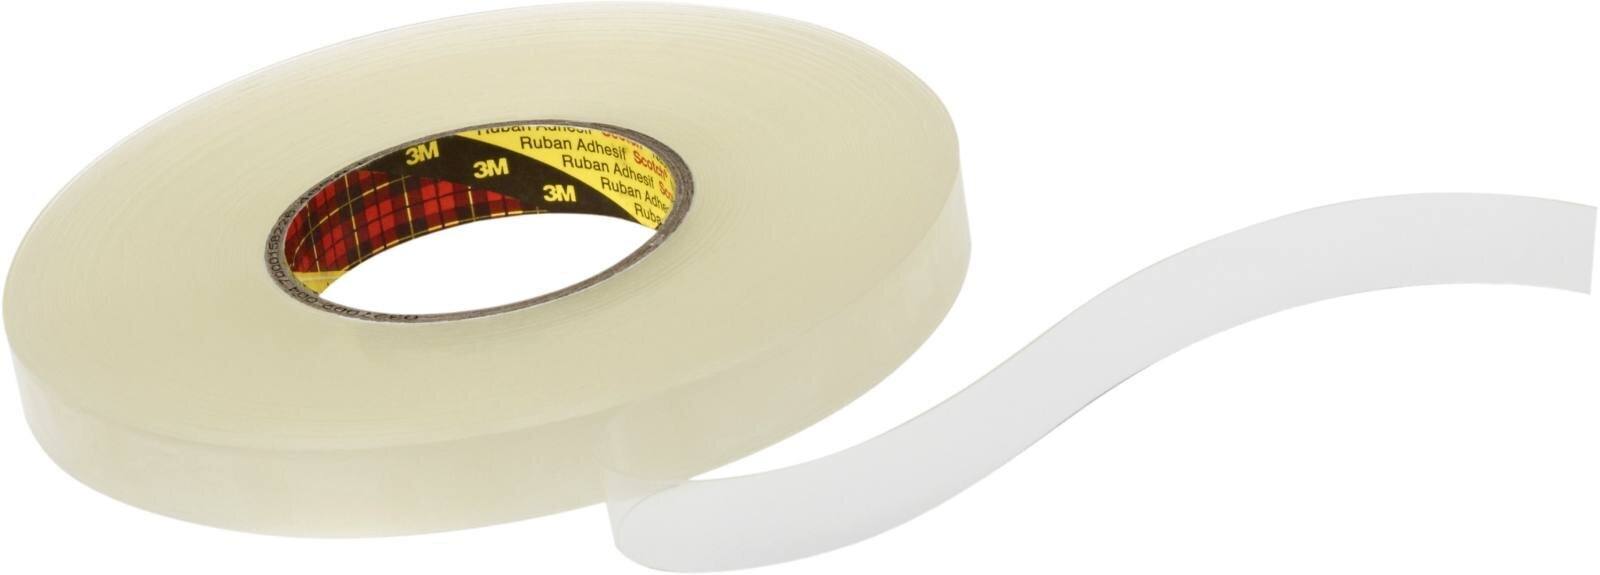 3M Double-sided removable adhesive tape 4658F, transparent, 19 mm x 25 m, 0.8 mm